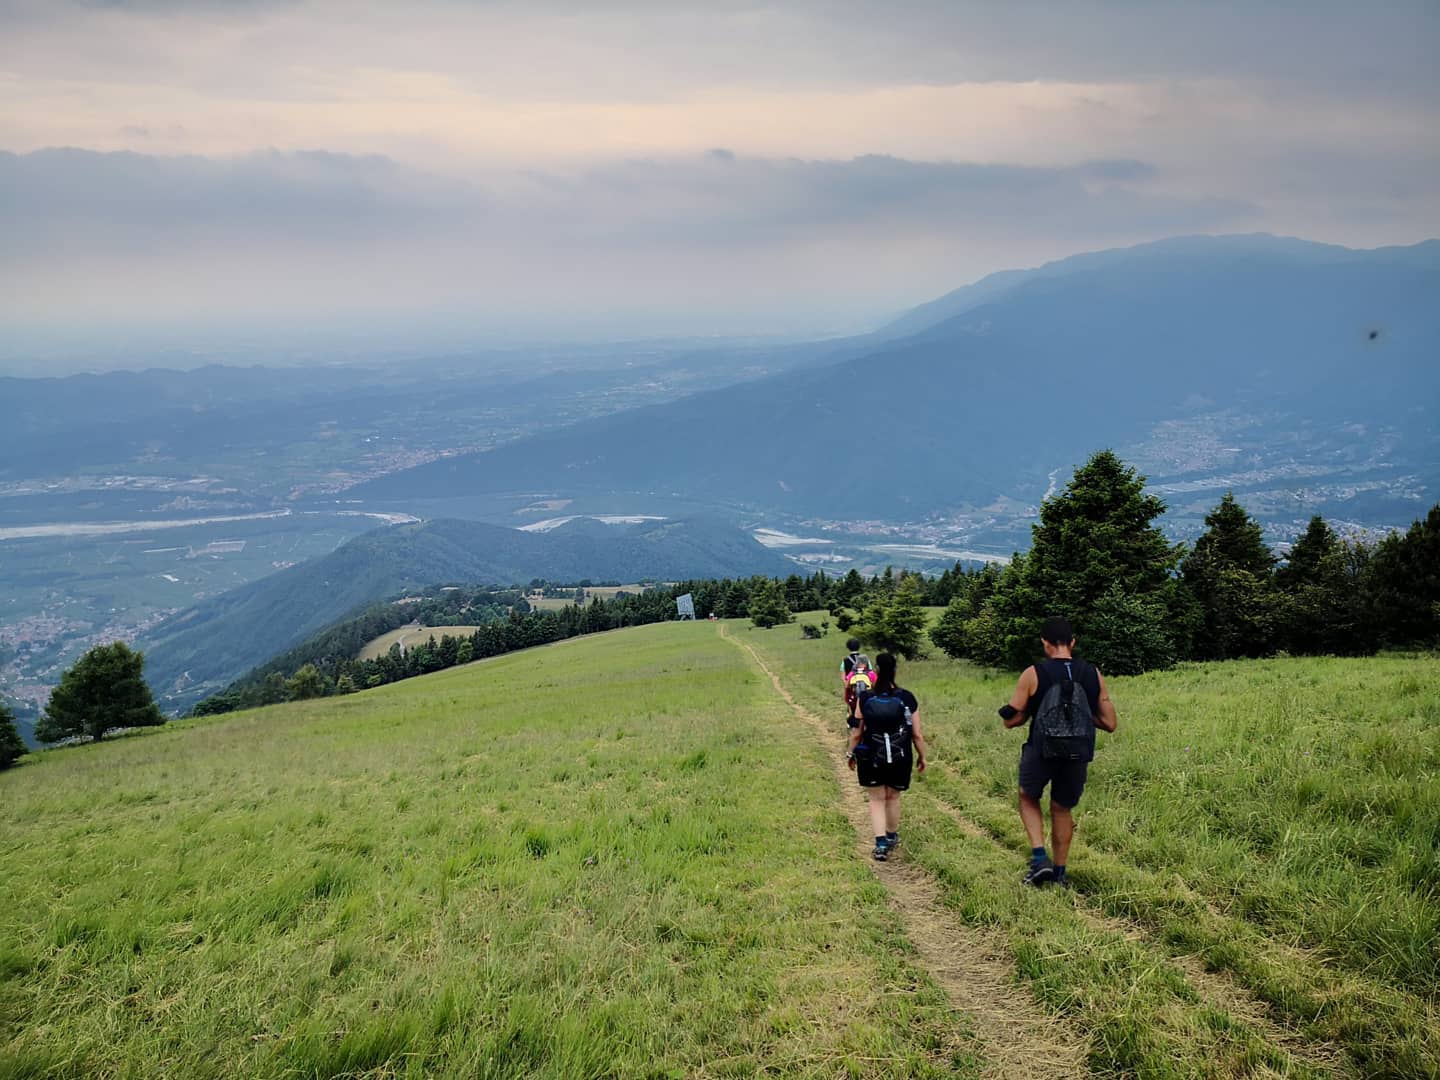 Hikers in the Prosecco Hills of Italy. Photo: Vania de Paoli.